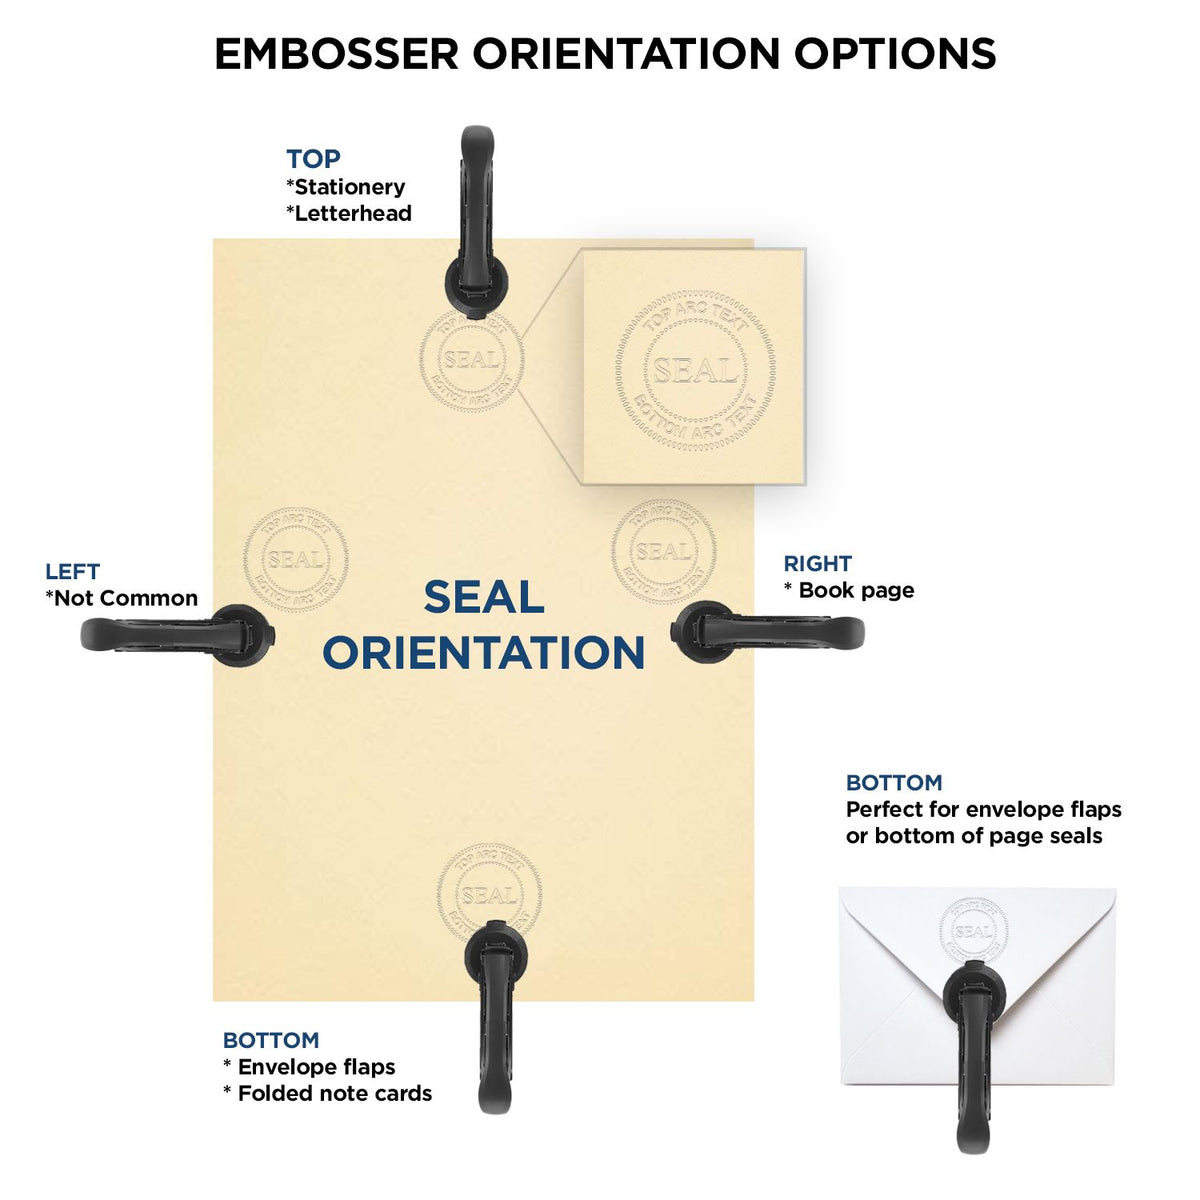 An infographic for the Gift Louisiana Land Surveyor Seal showing embosser orientation, this is showing examples of a top, bottom, right and left insert.